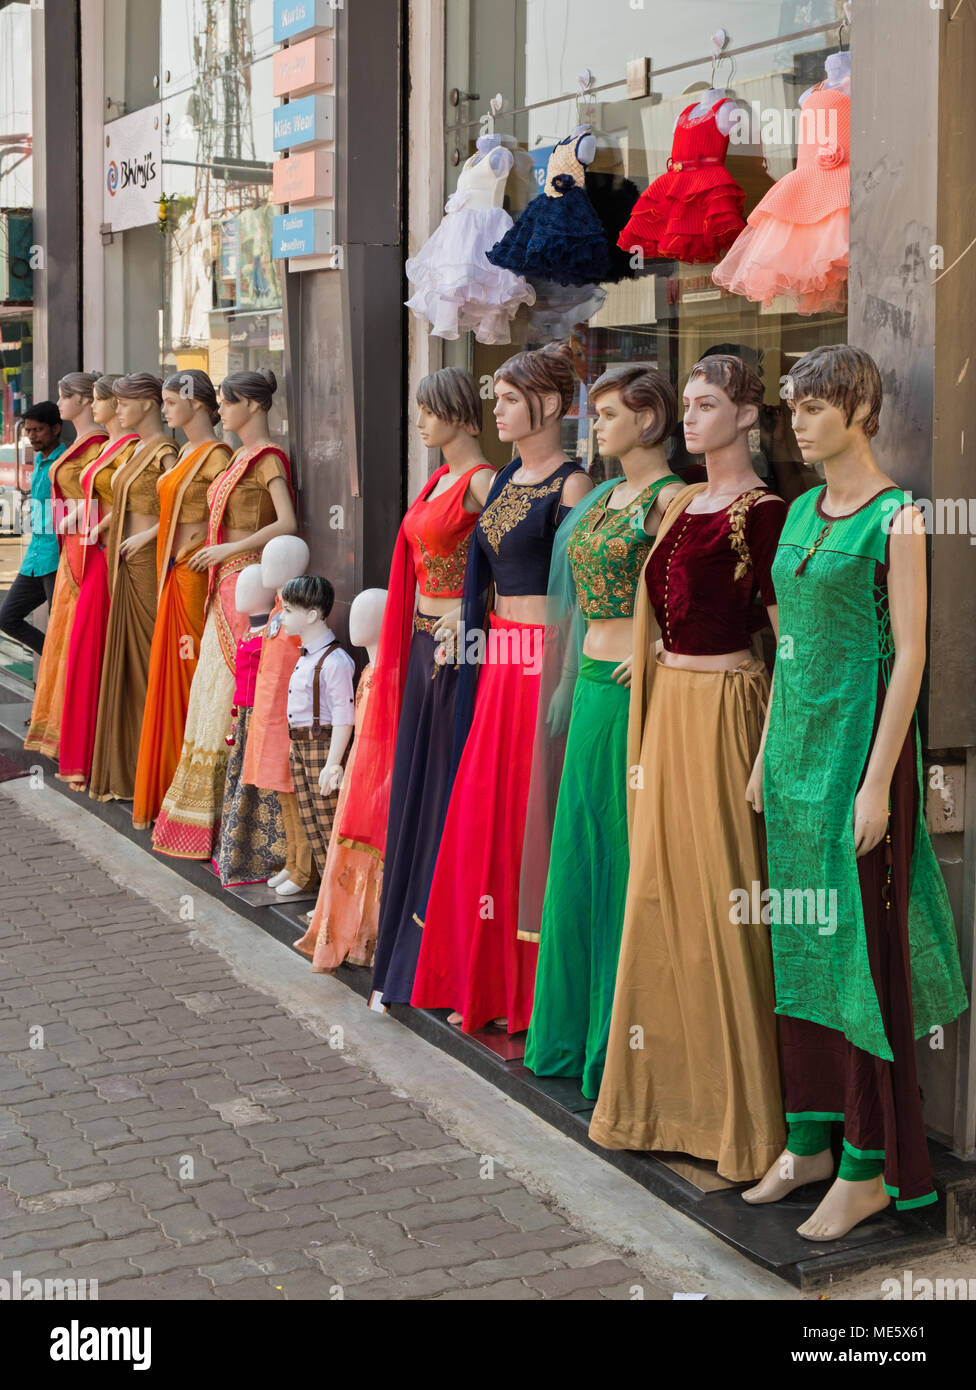 Mysore, India - March 3, 2018: An unidentified youth standing at the end of a row of mannequins outside a clothing store in the city centre Stock Photo